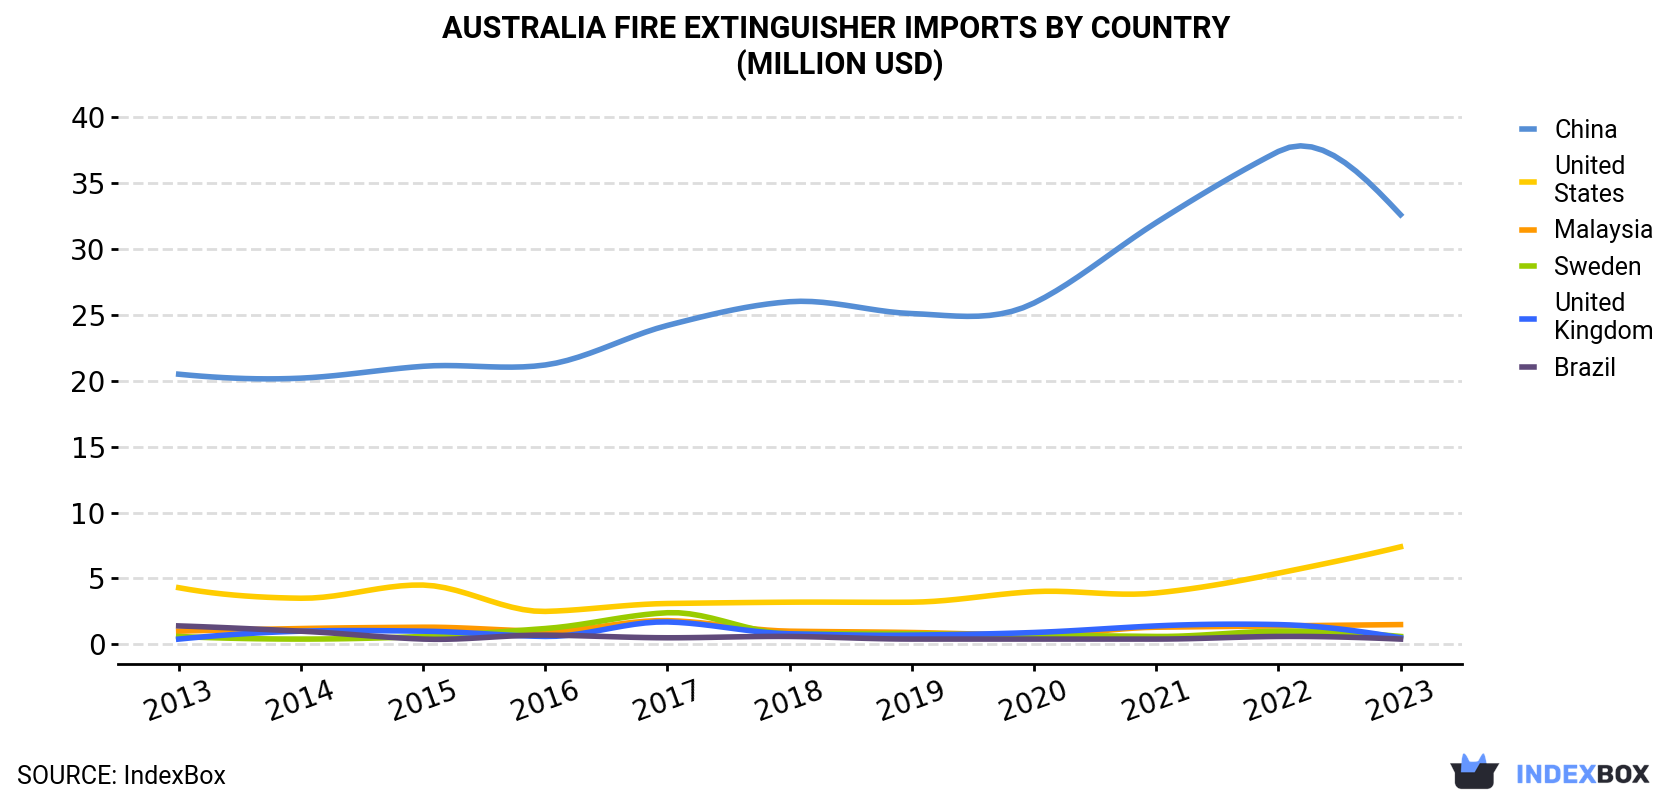 Australia Fire Extinguisher Imports By Country (Million USD)